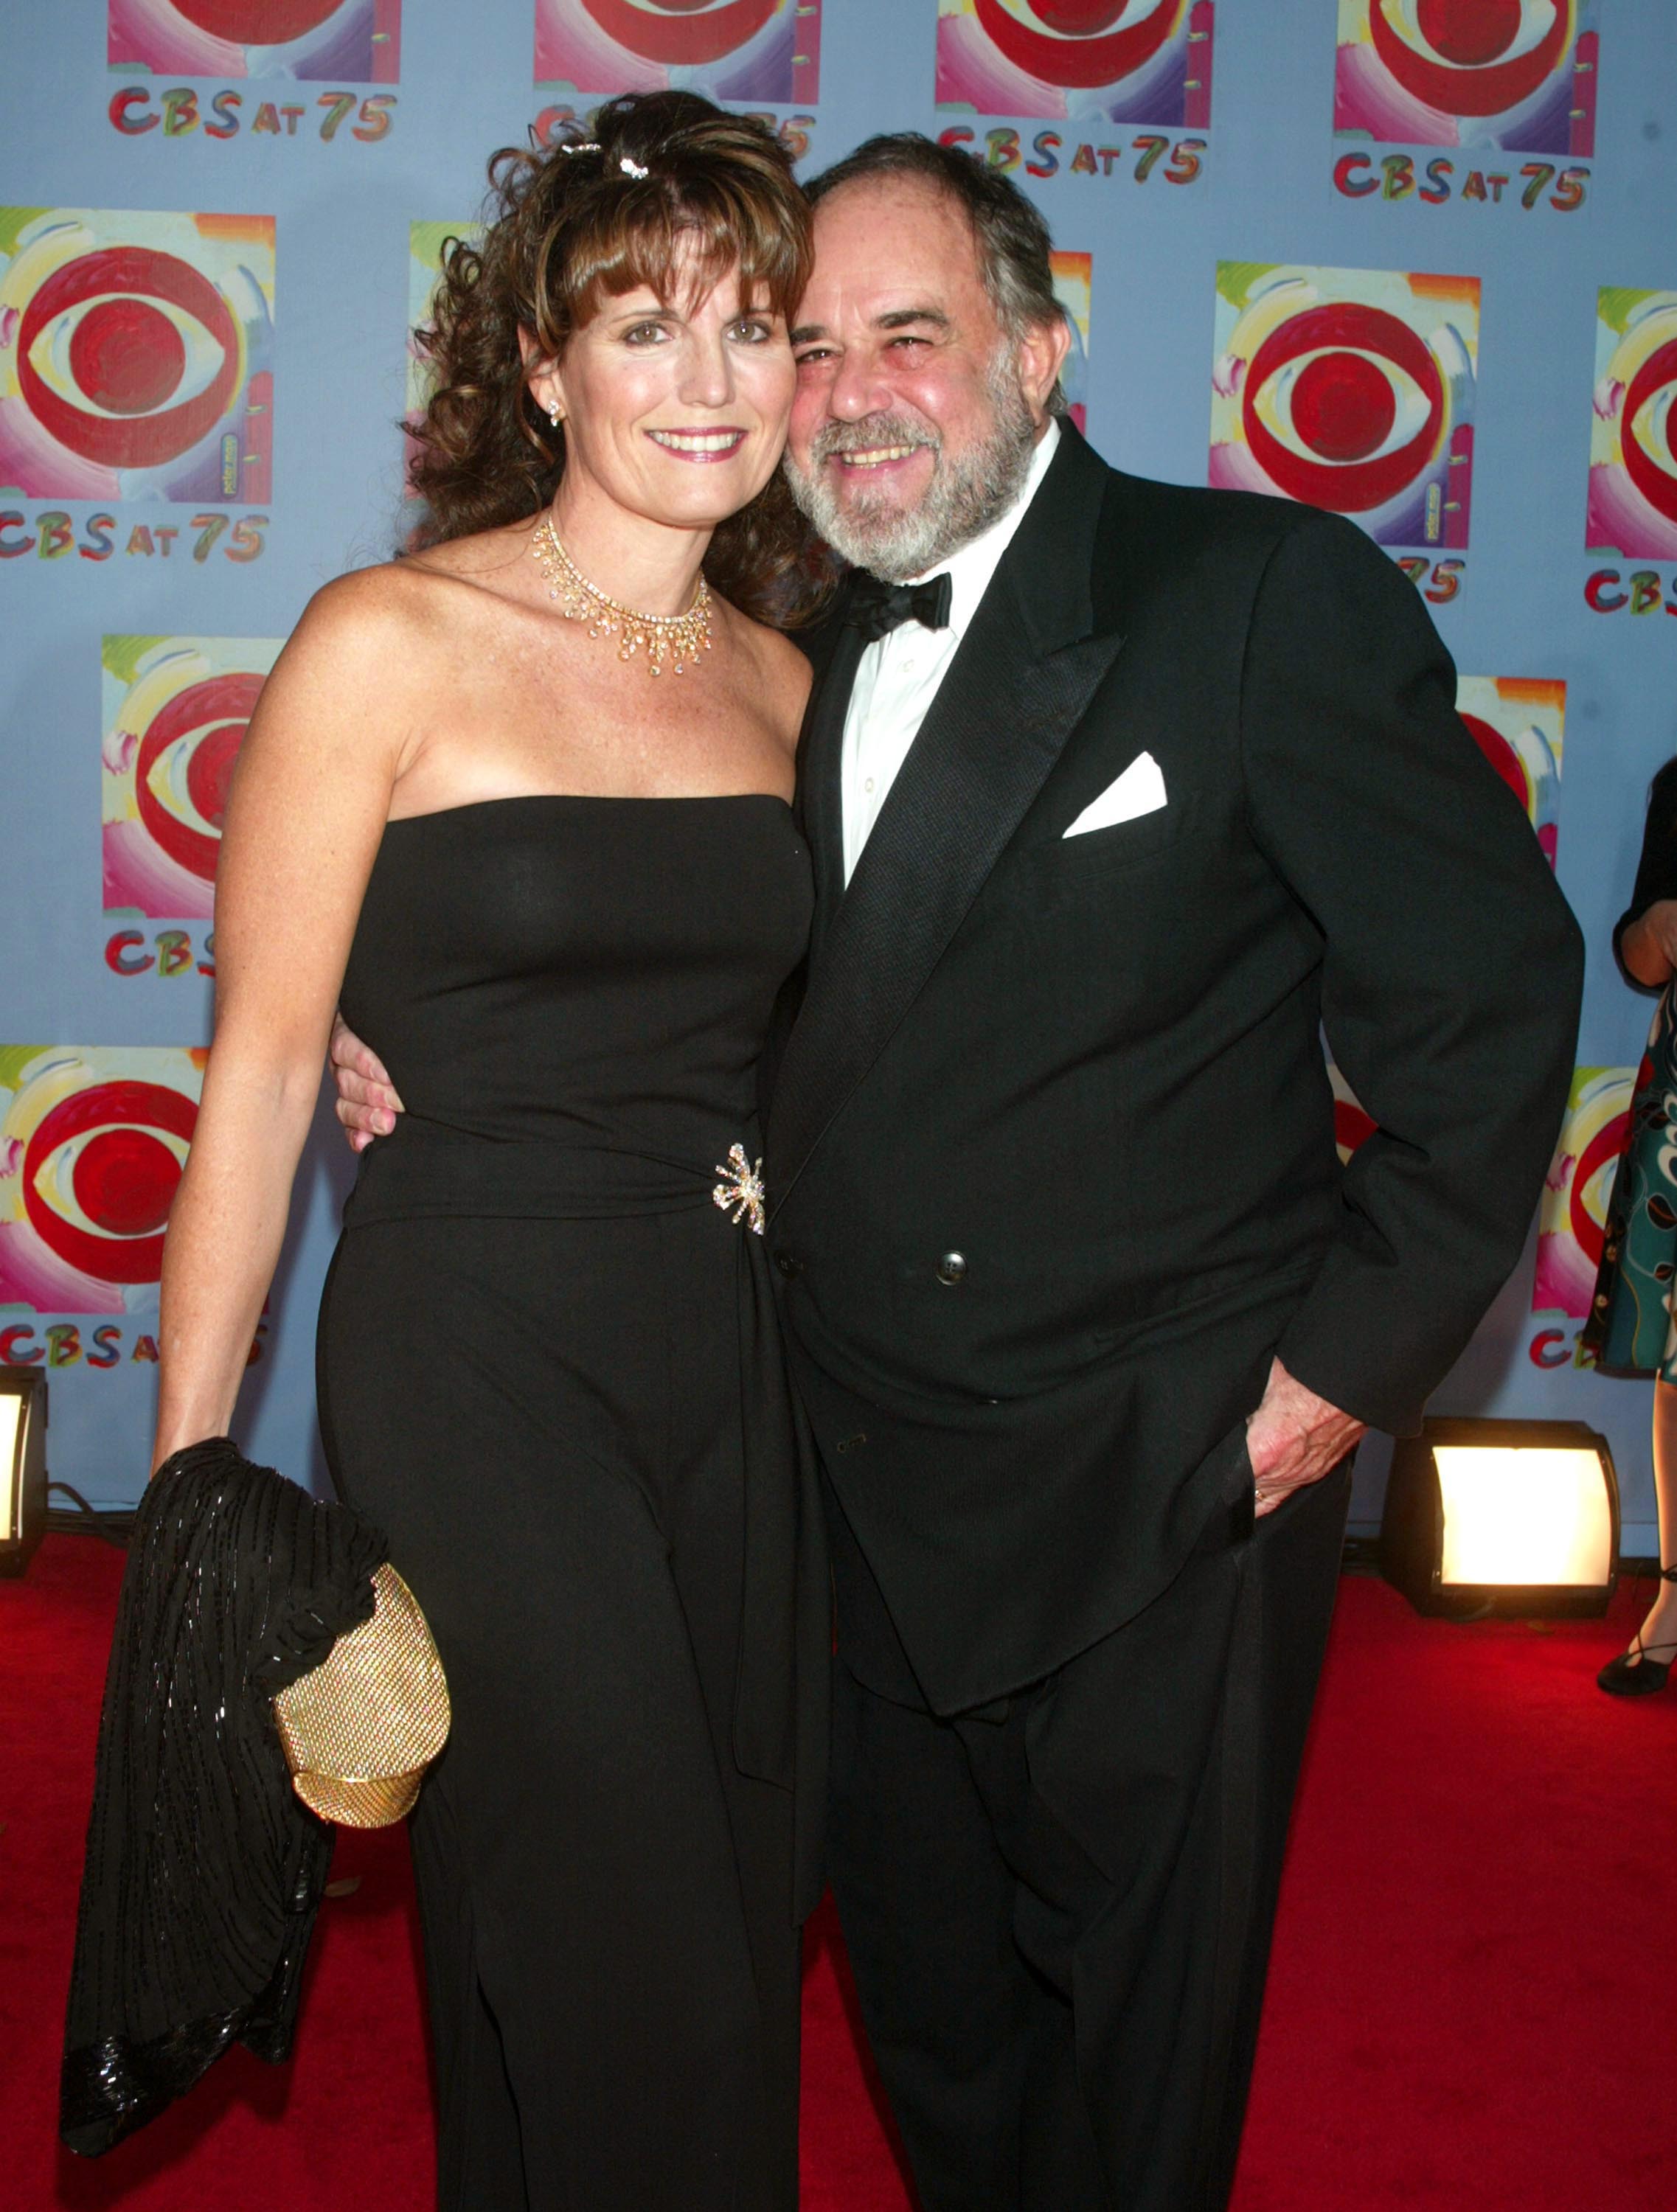 Lucie Arnaz and Laurence Luckinbill at the CBS at 75 at Hammerstein Ballroom in 2003 | Source: Getty Images